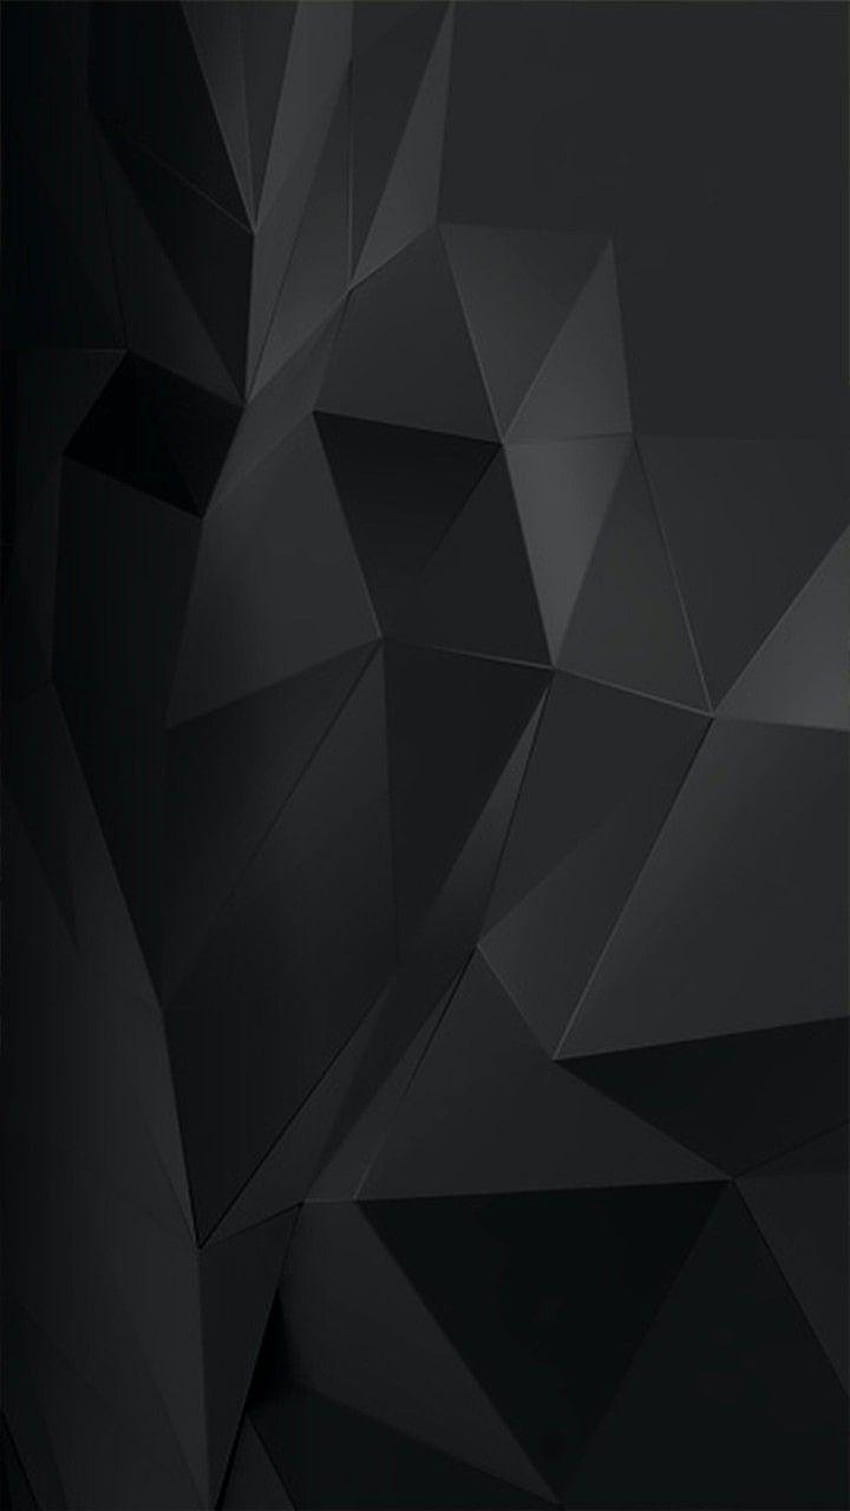 Polygon pattern on gray painted mobile phone wallpaper vector  premium  image by rawpixelcom    Grey wallpaper iphone Polygon pattern Phone  wallpaper patterns